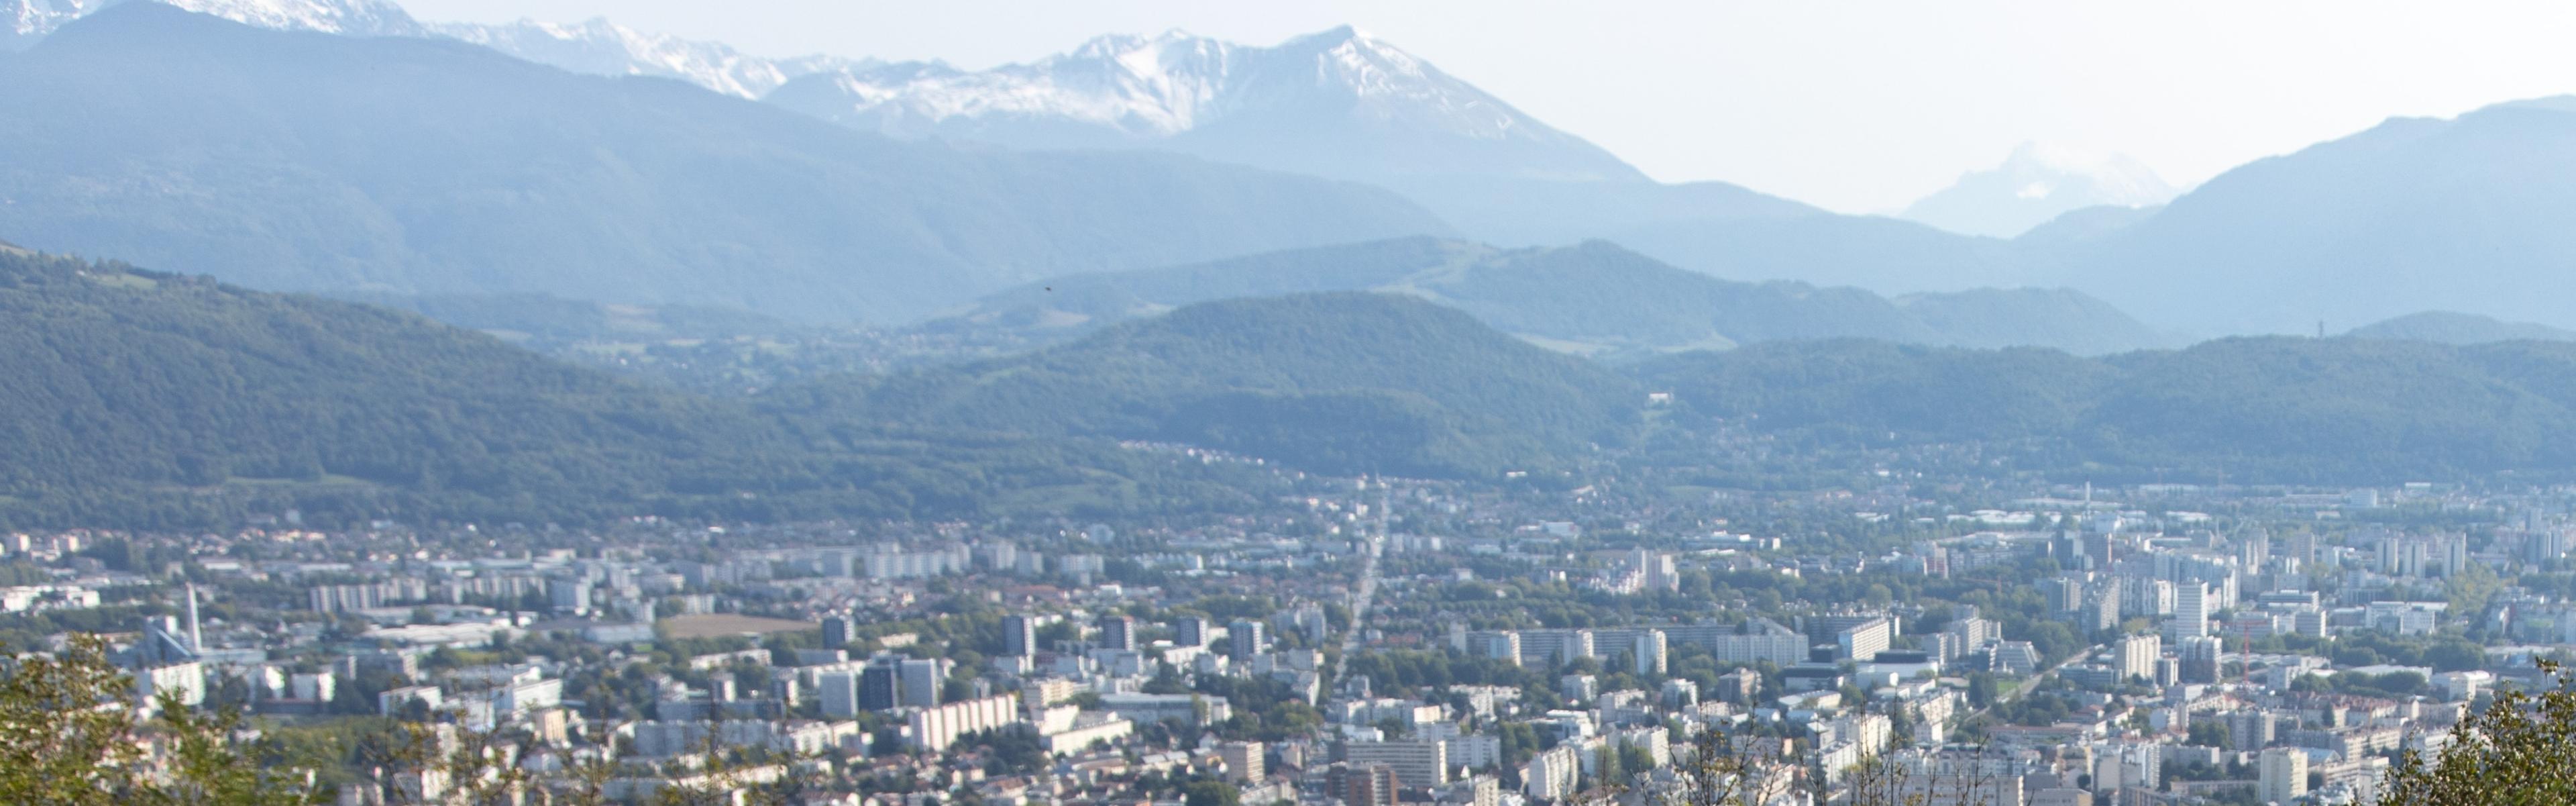 view of the city of Grenoble